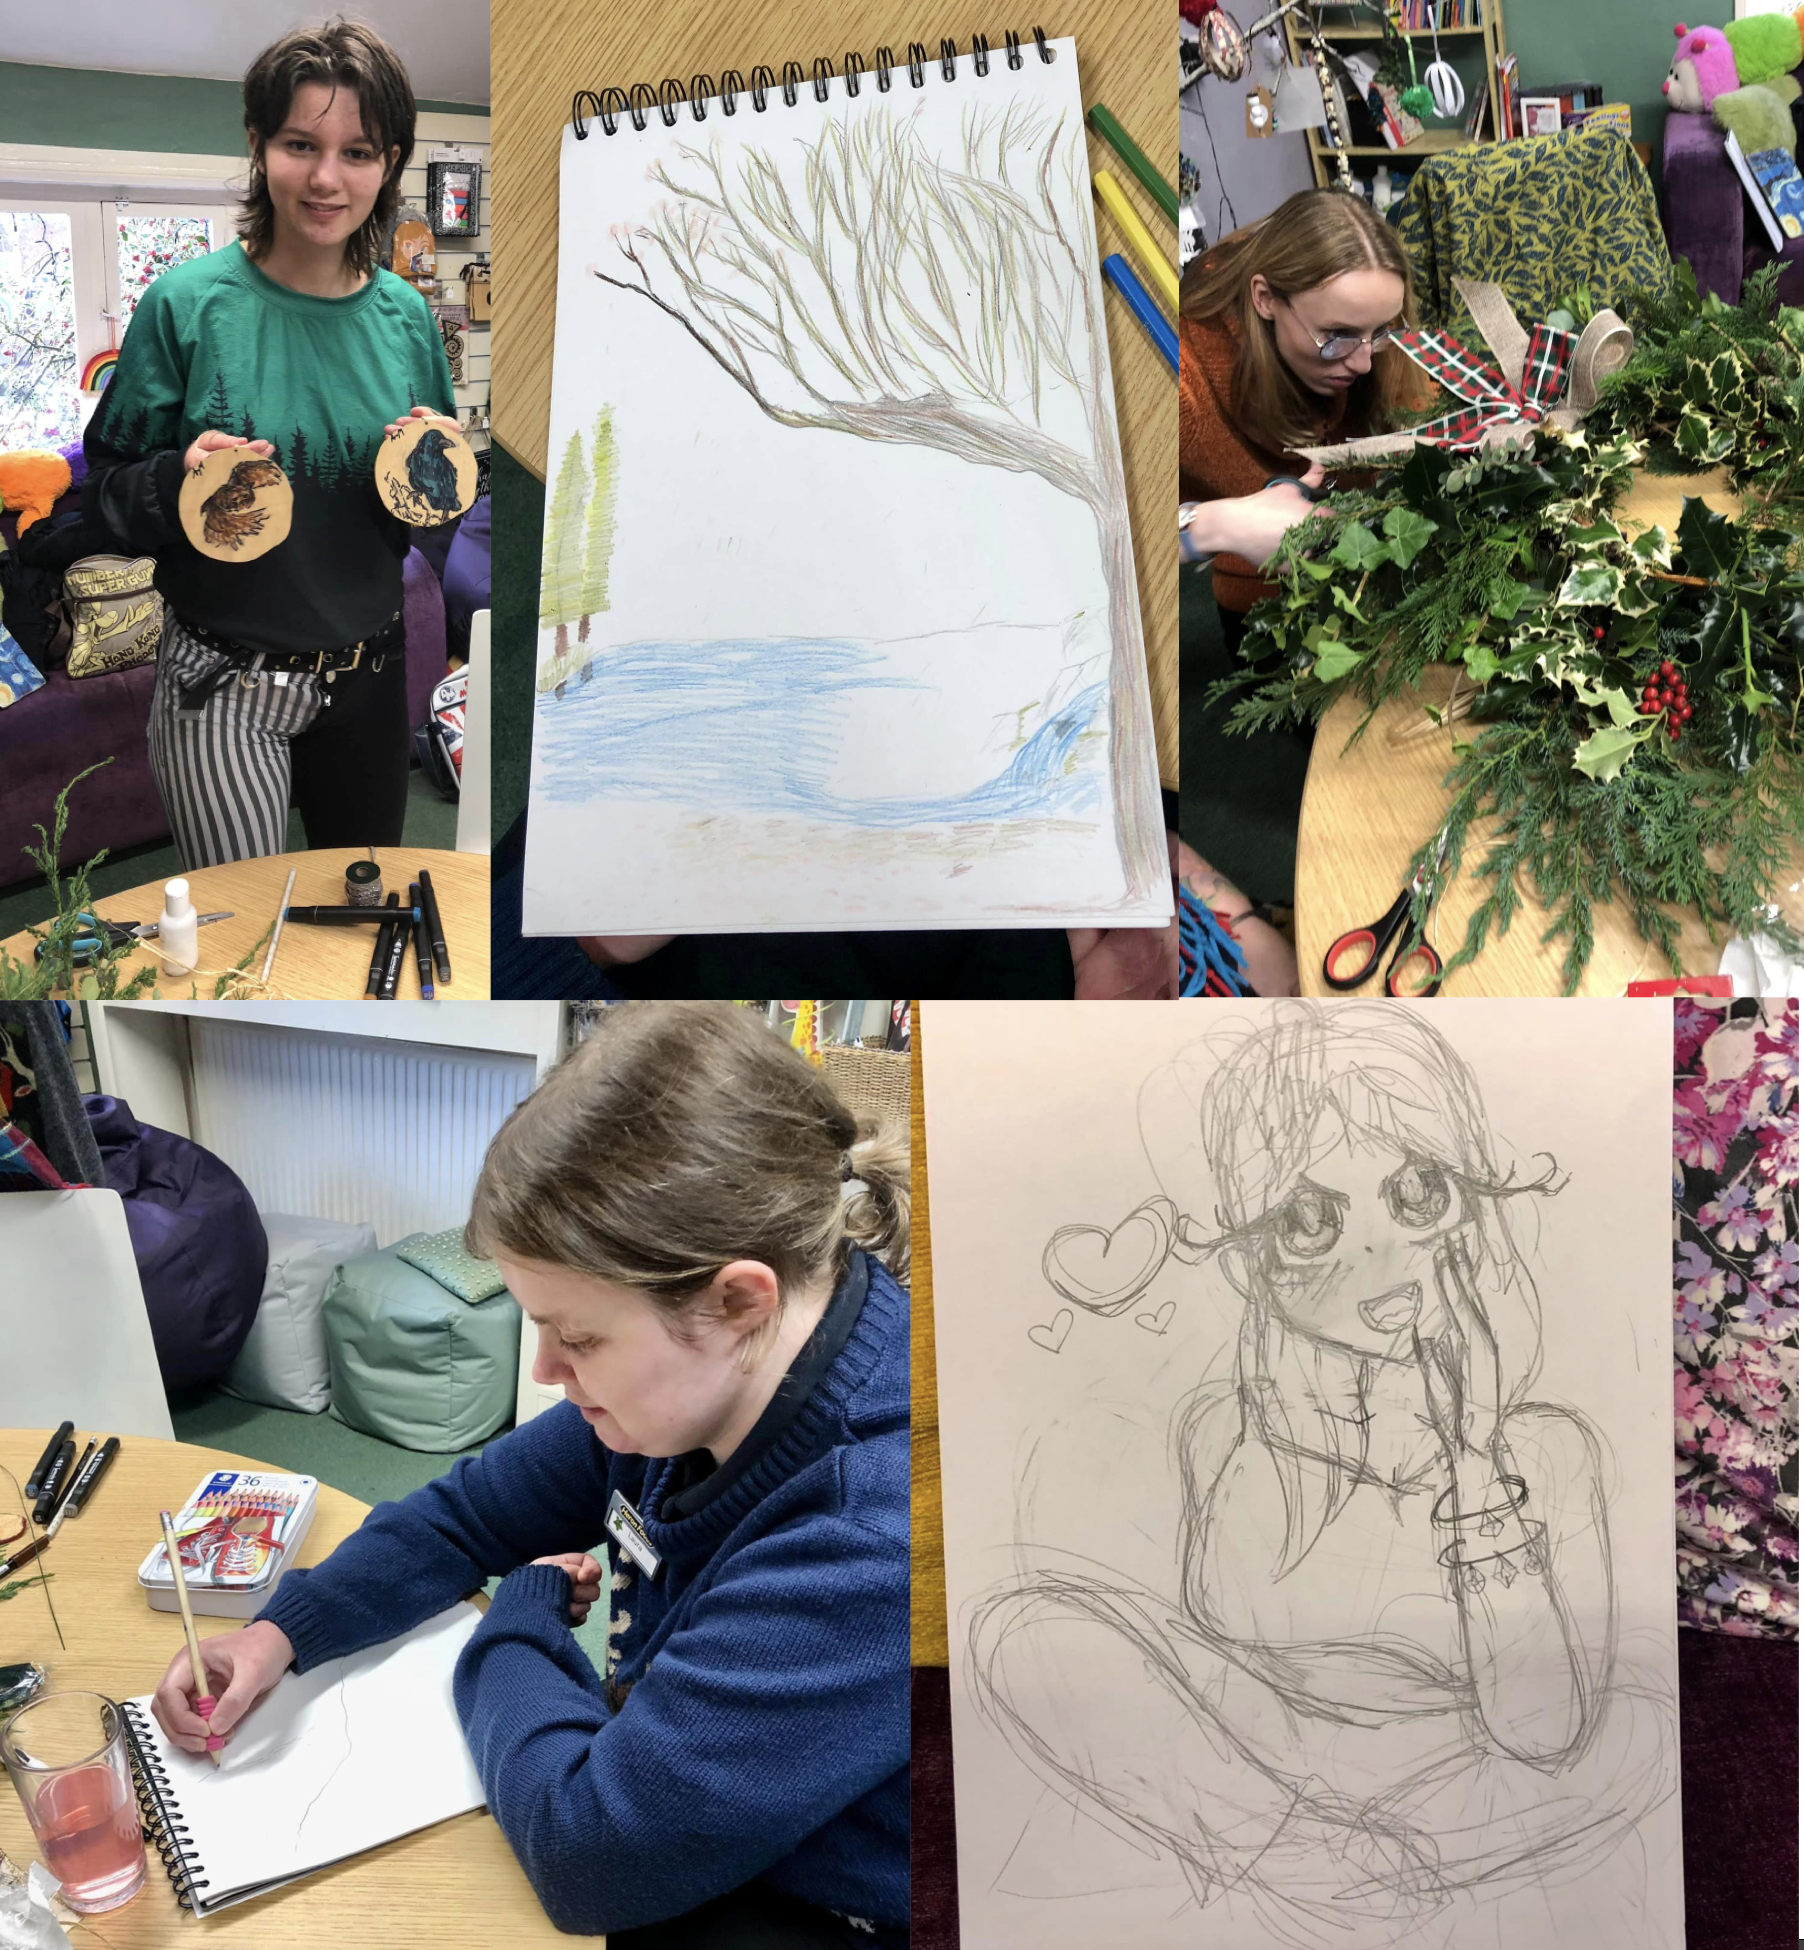 Festive creativity at young people’s support charity